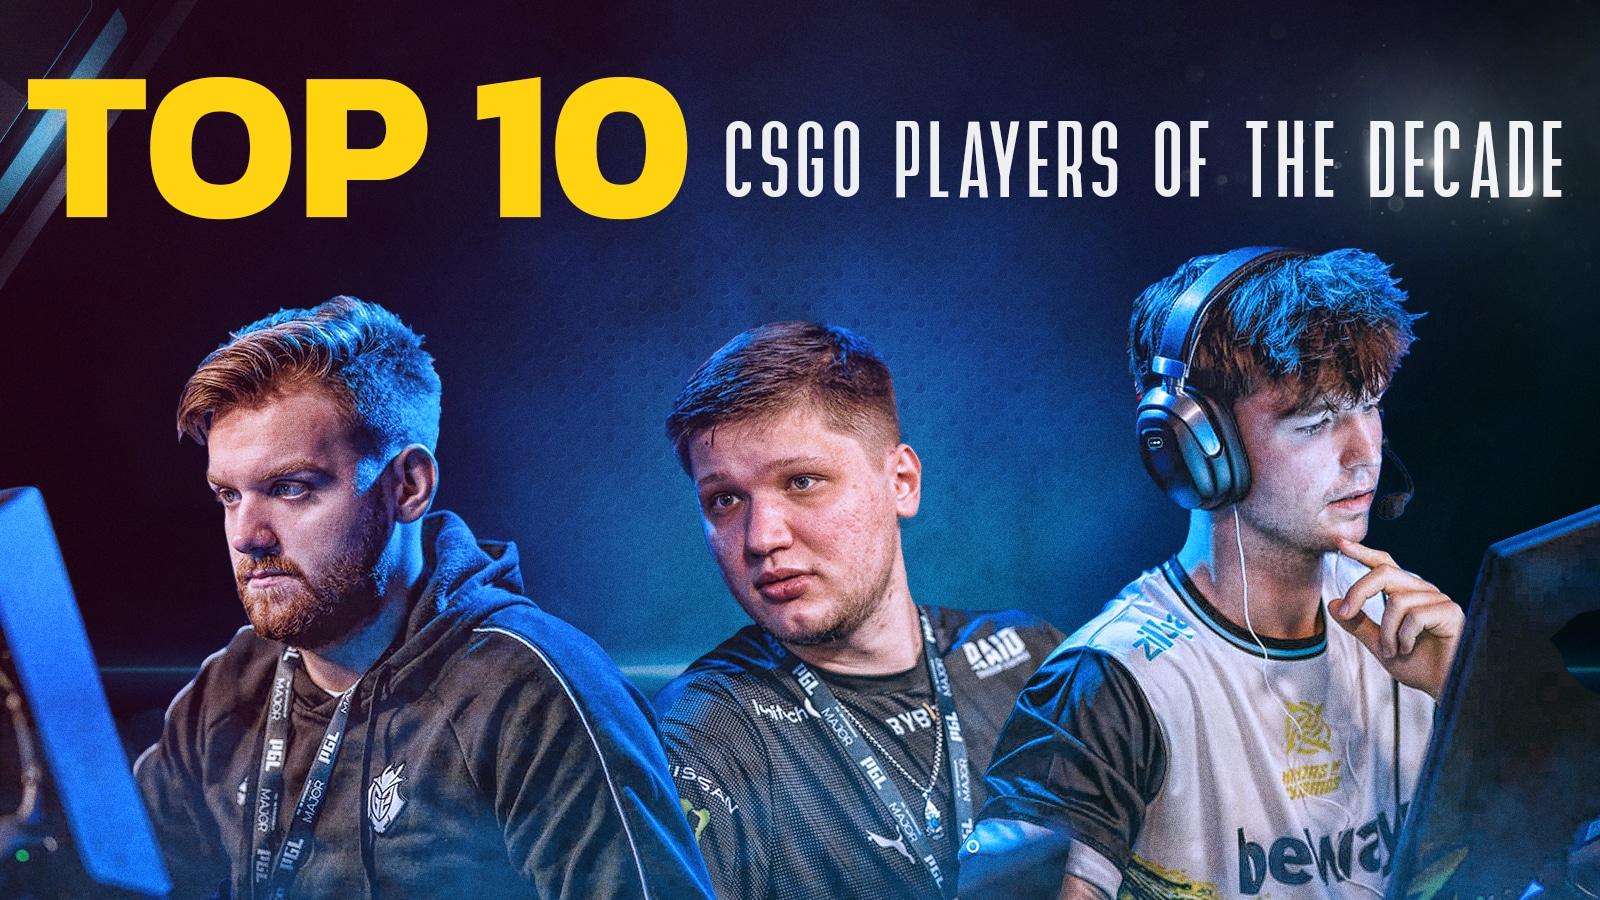 s1mple - The Best Player In The World - HLTV.org's #1 Of 2022